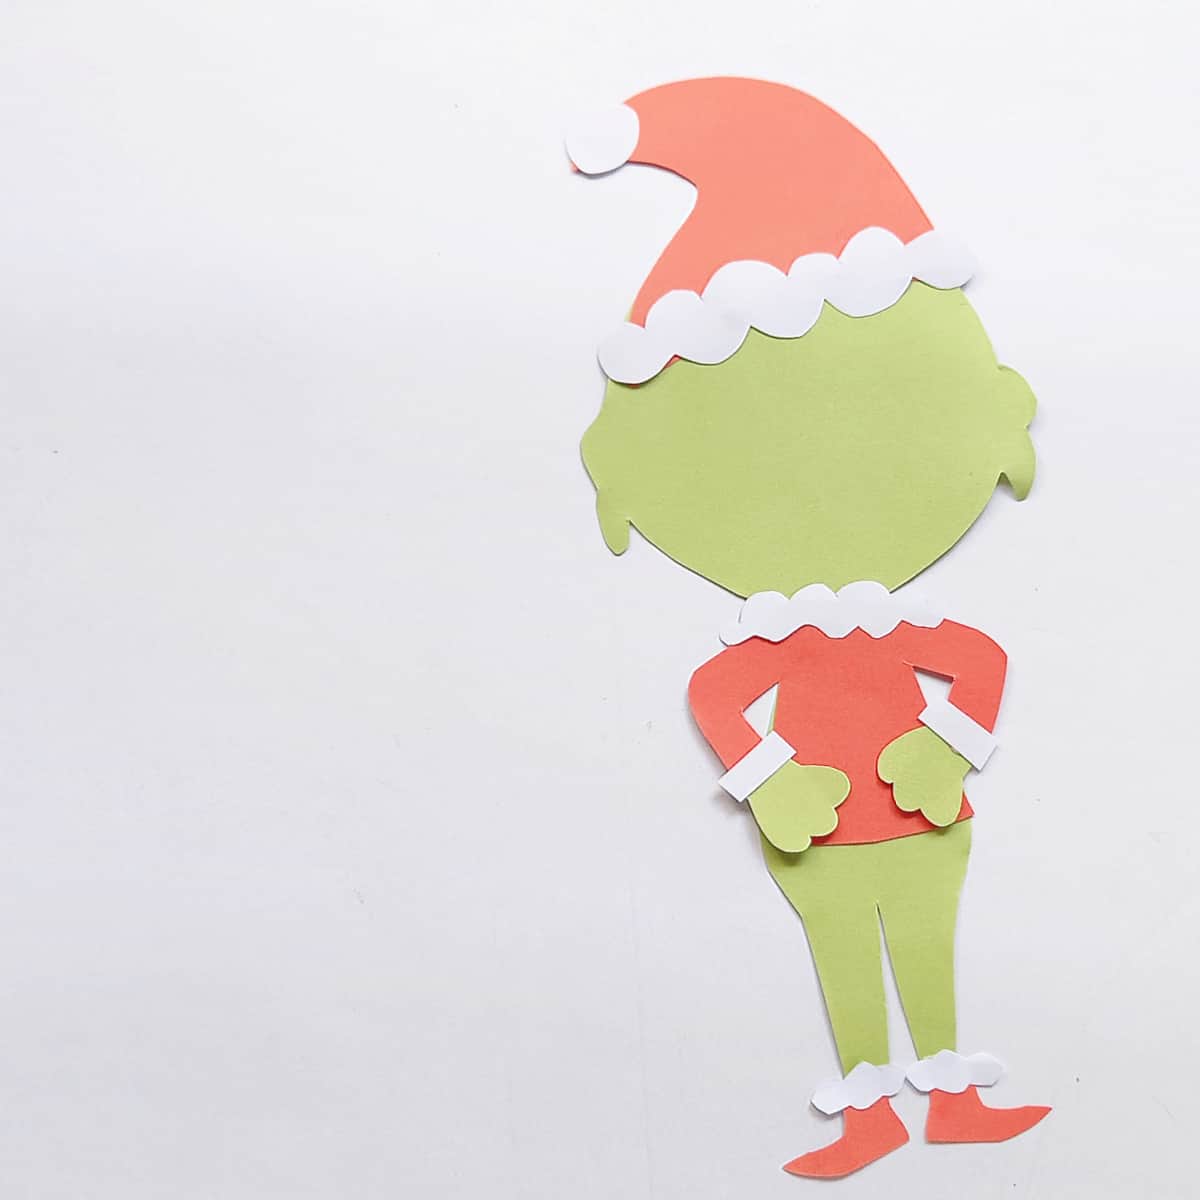 Grinch paper craft with green body, red hat, red coat and red shoes with white trim.